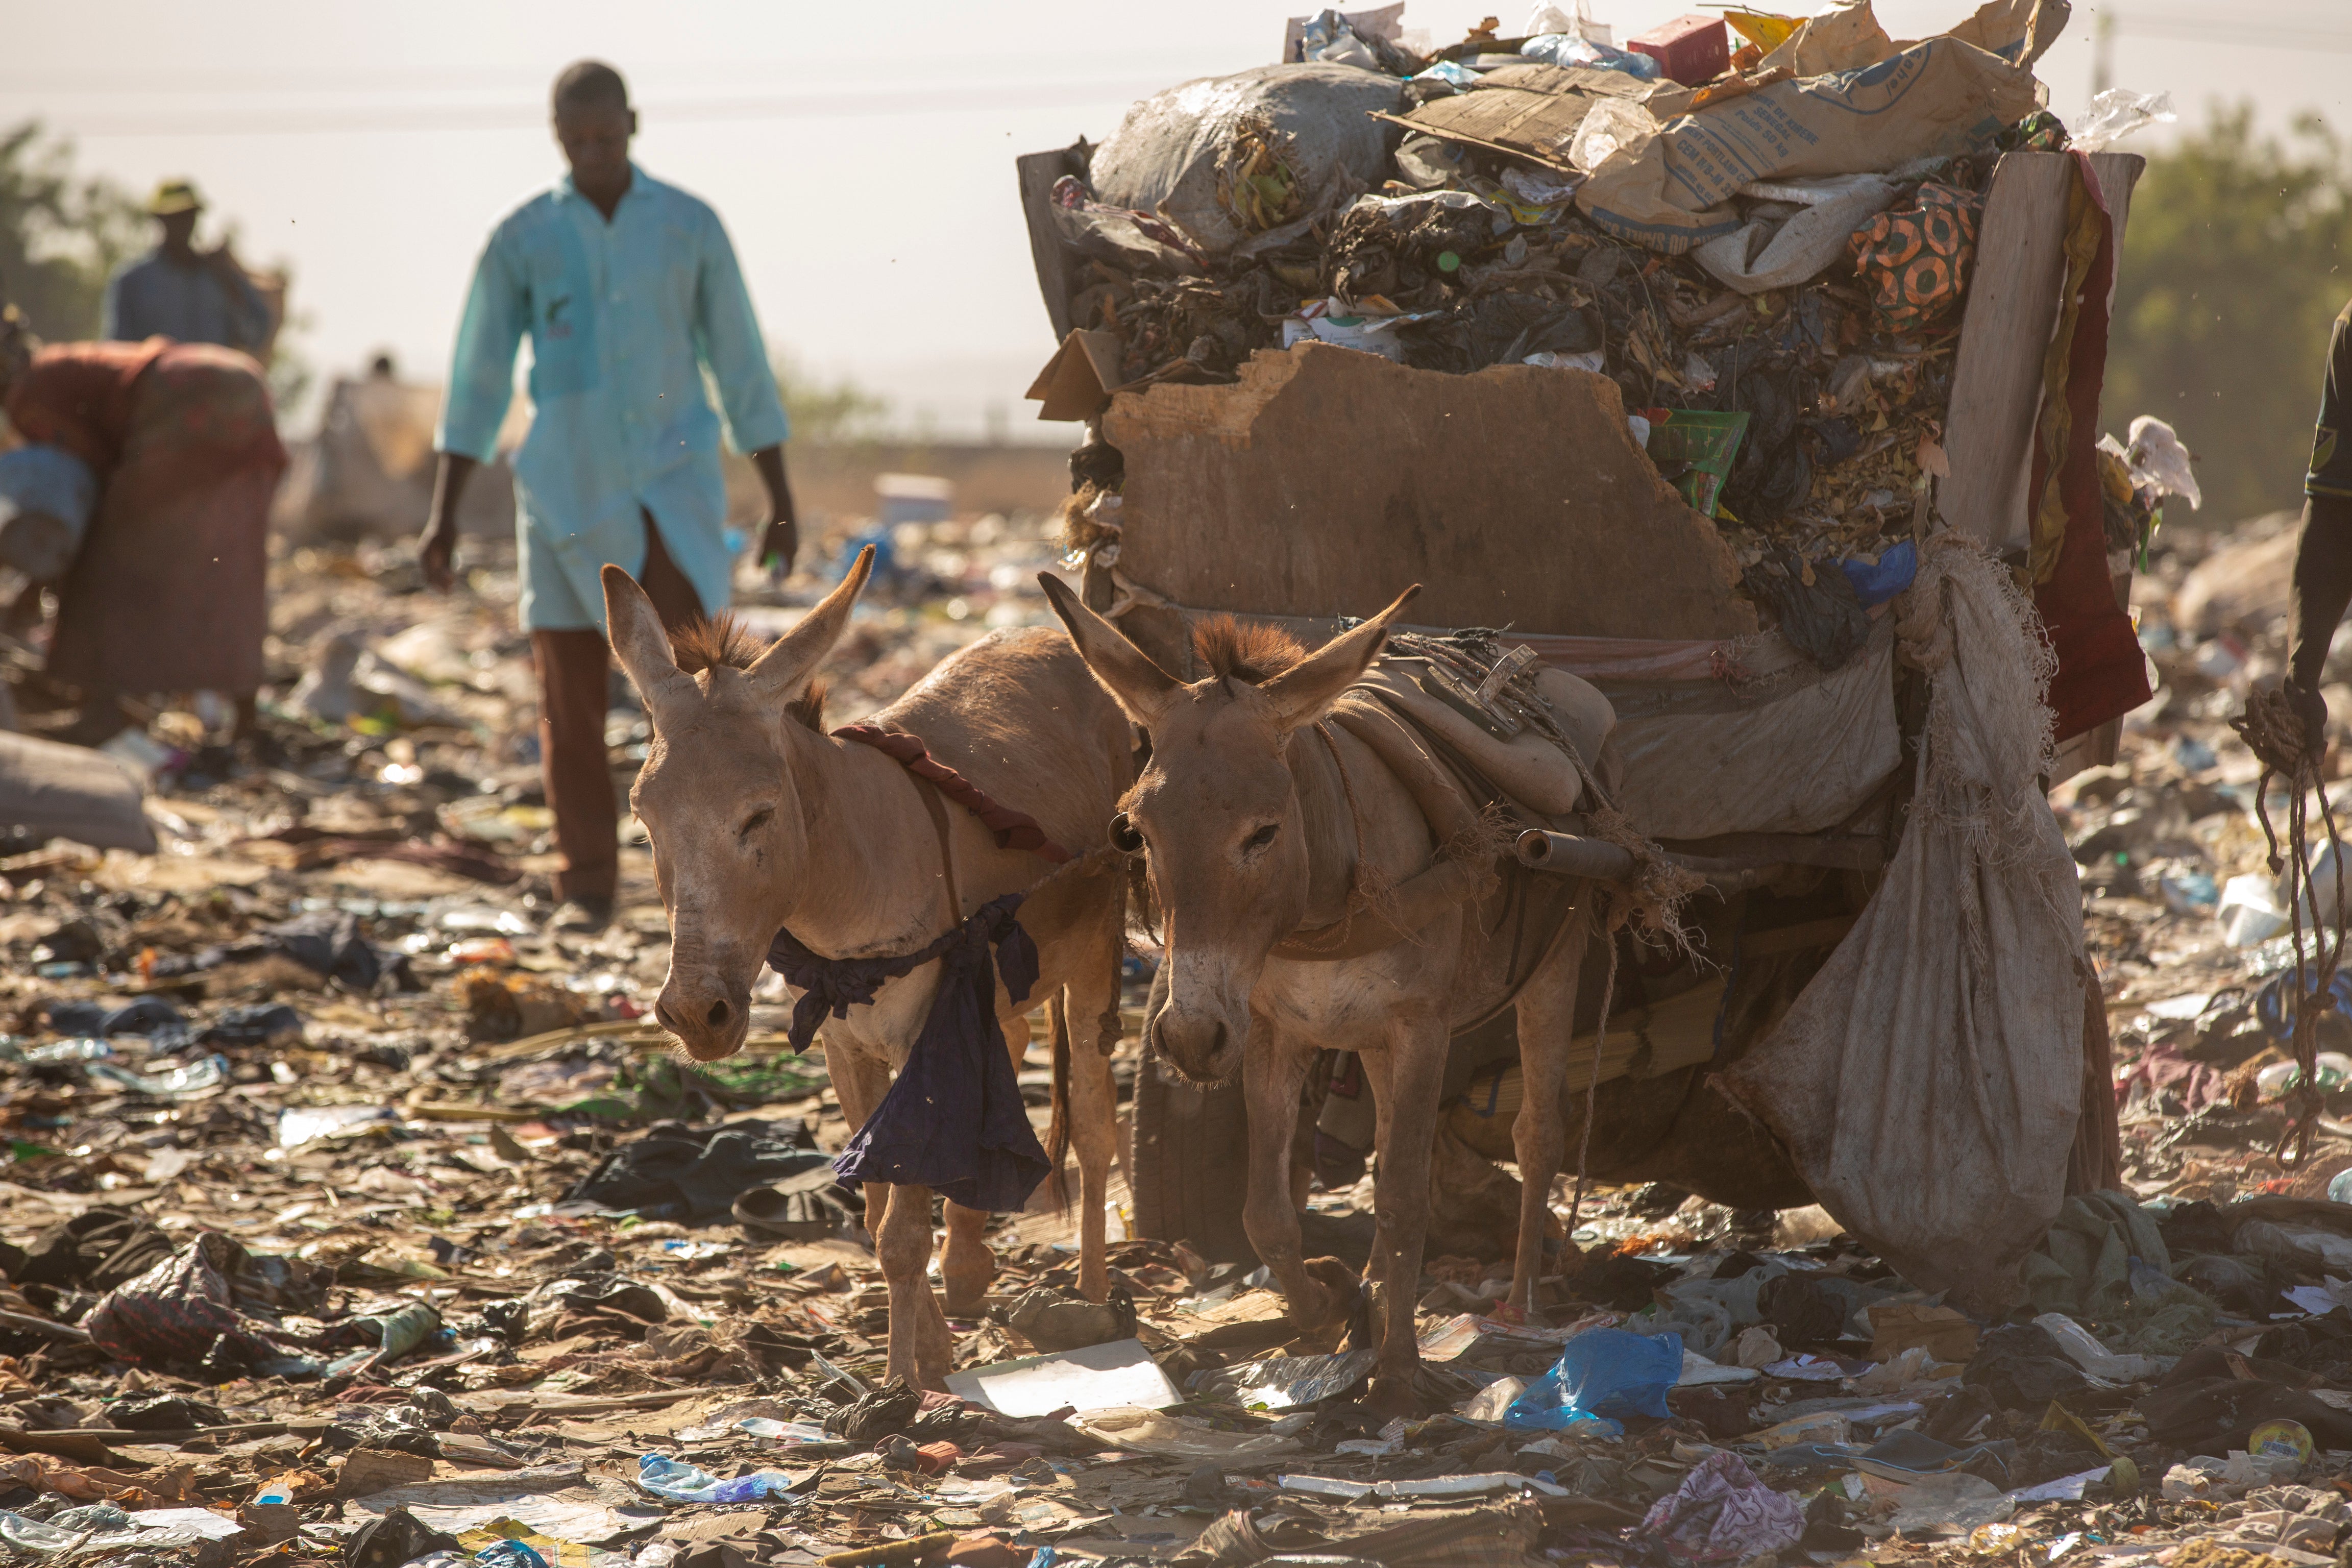 The global explosion in plastic pollution is posing a deadly threat to donkeys and other working animals